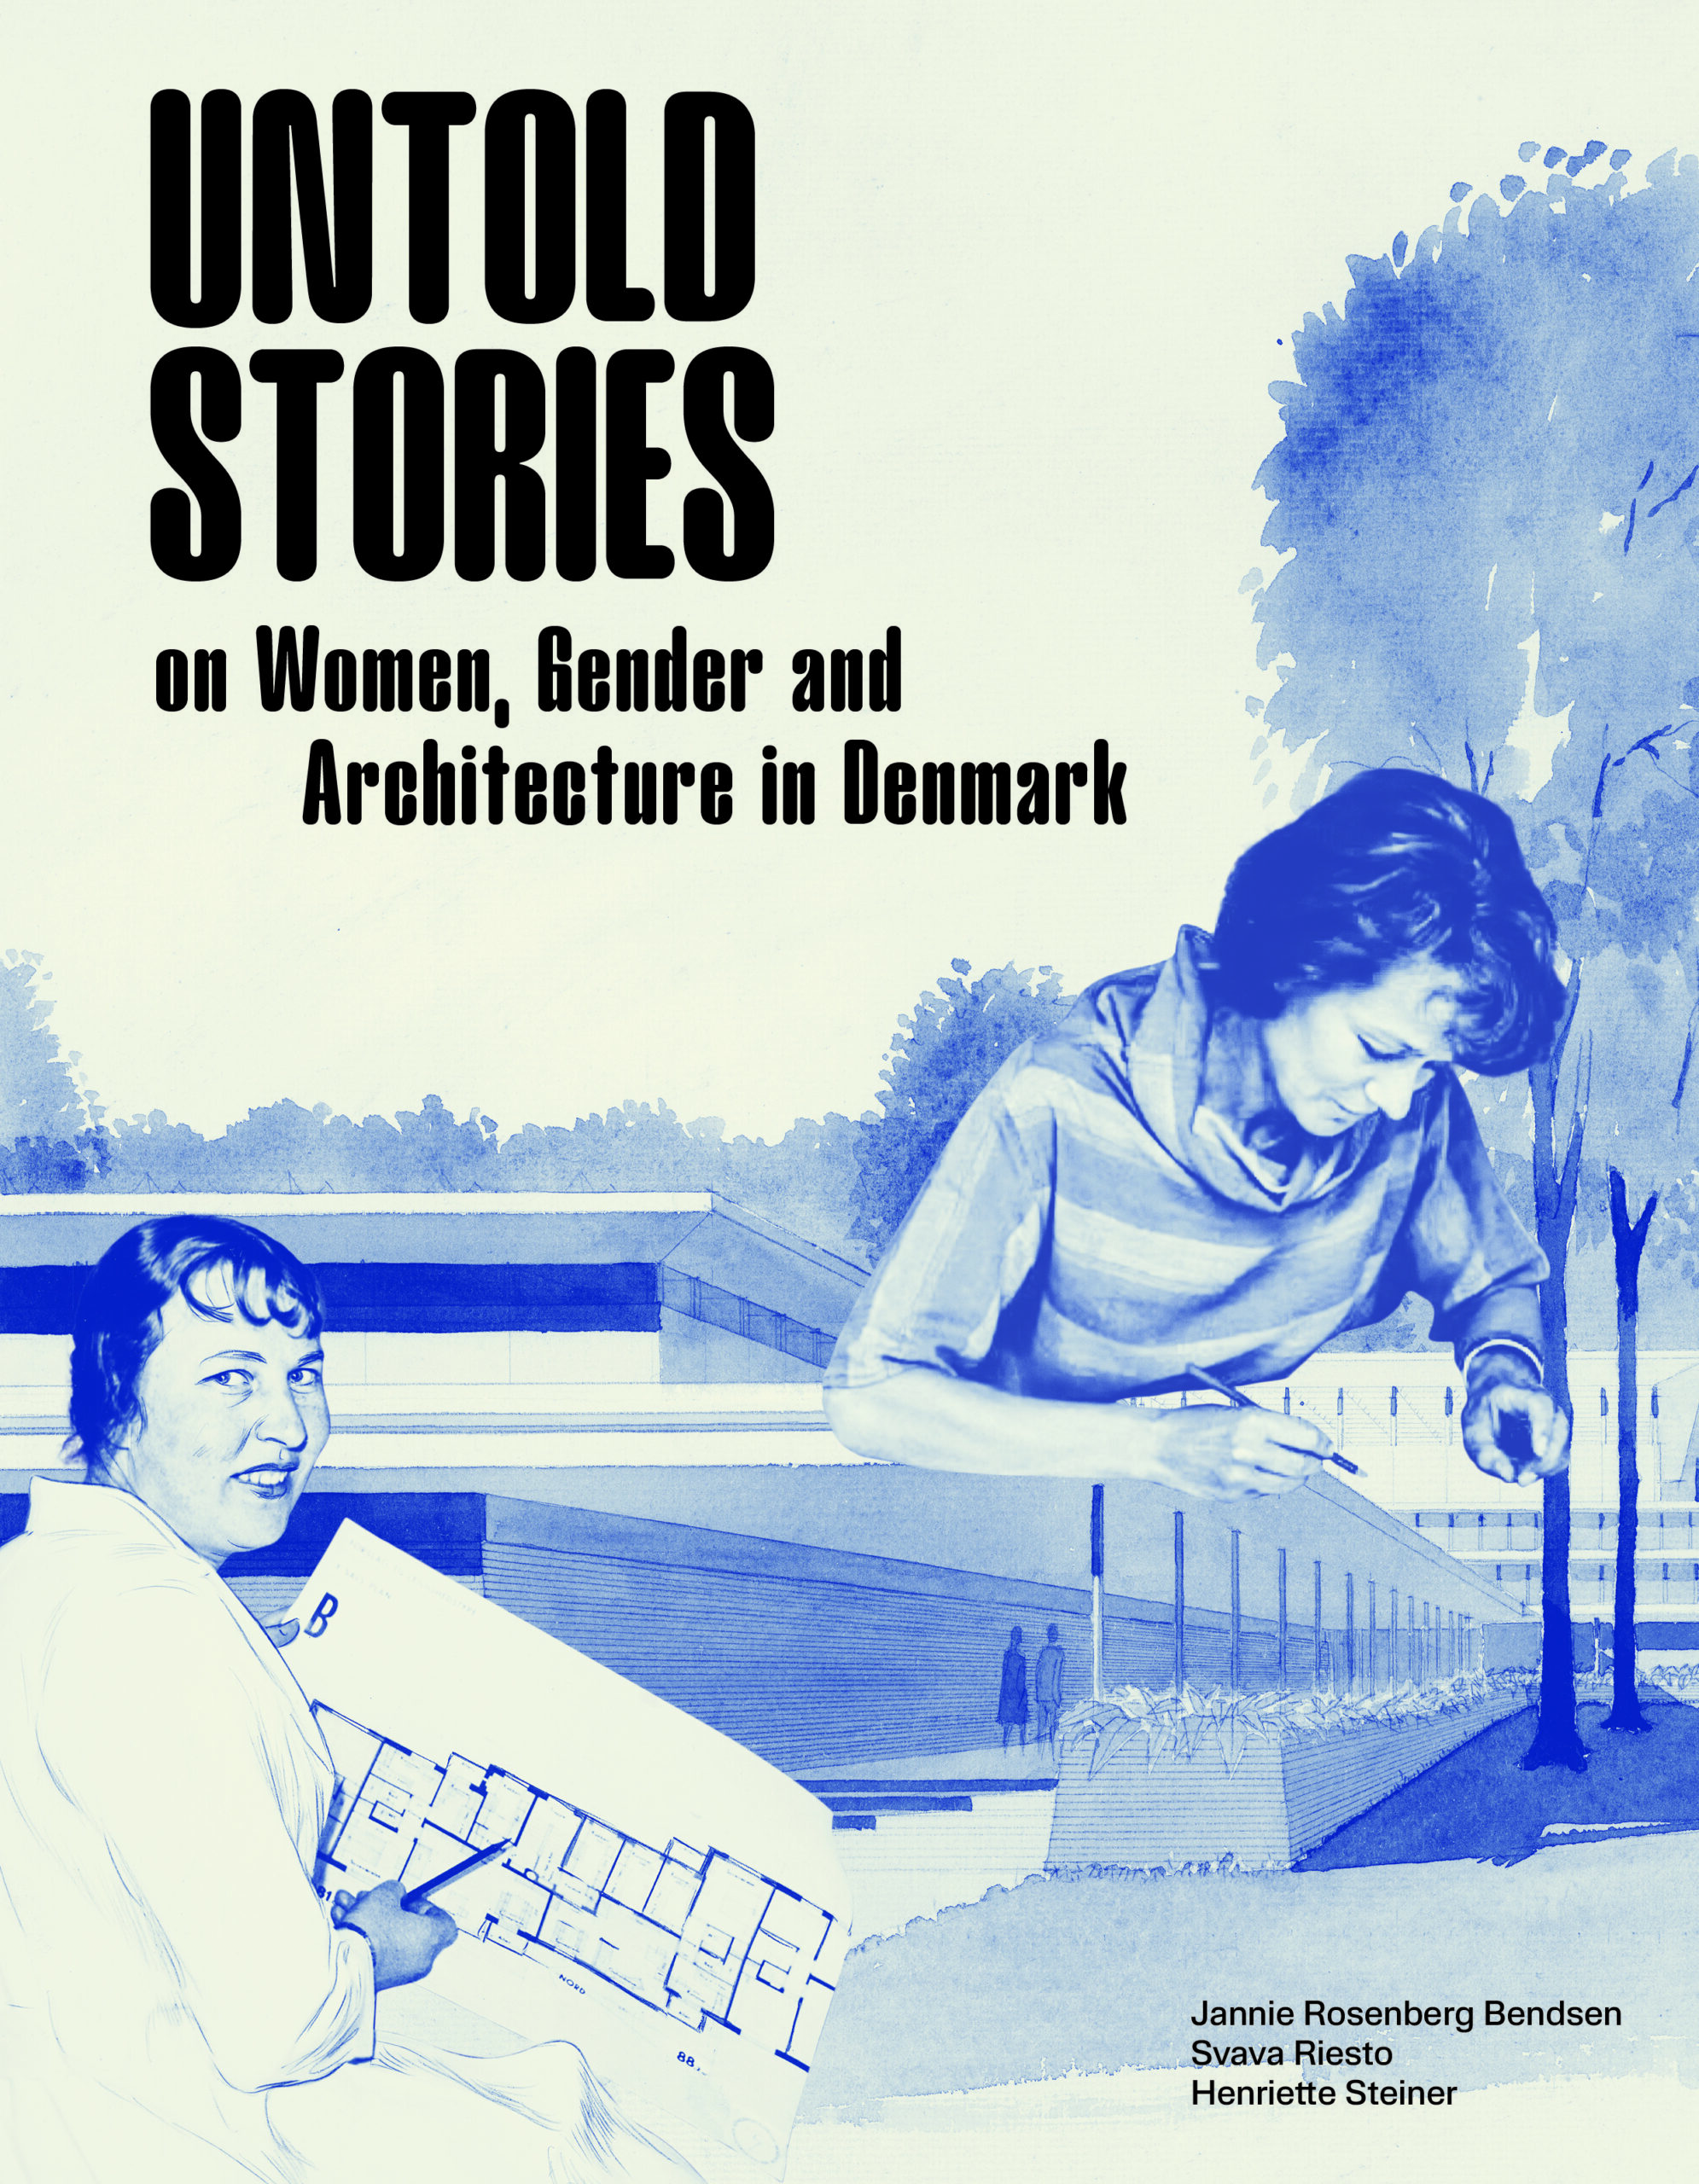 The cover page of Untold Stories: Women, Gender, and Architecture in Denmark showing a collage featuring two women and a hand-drawn architecture.